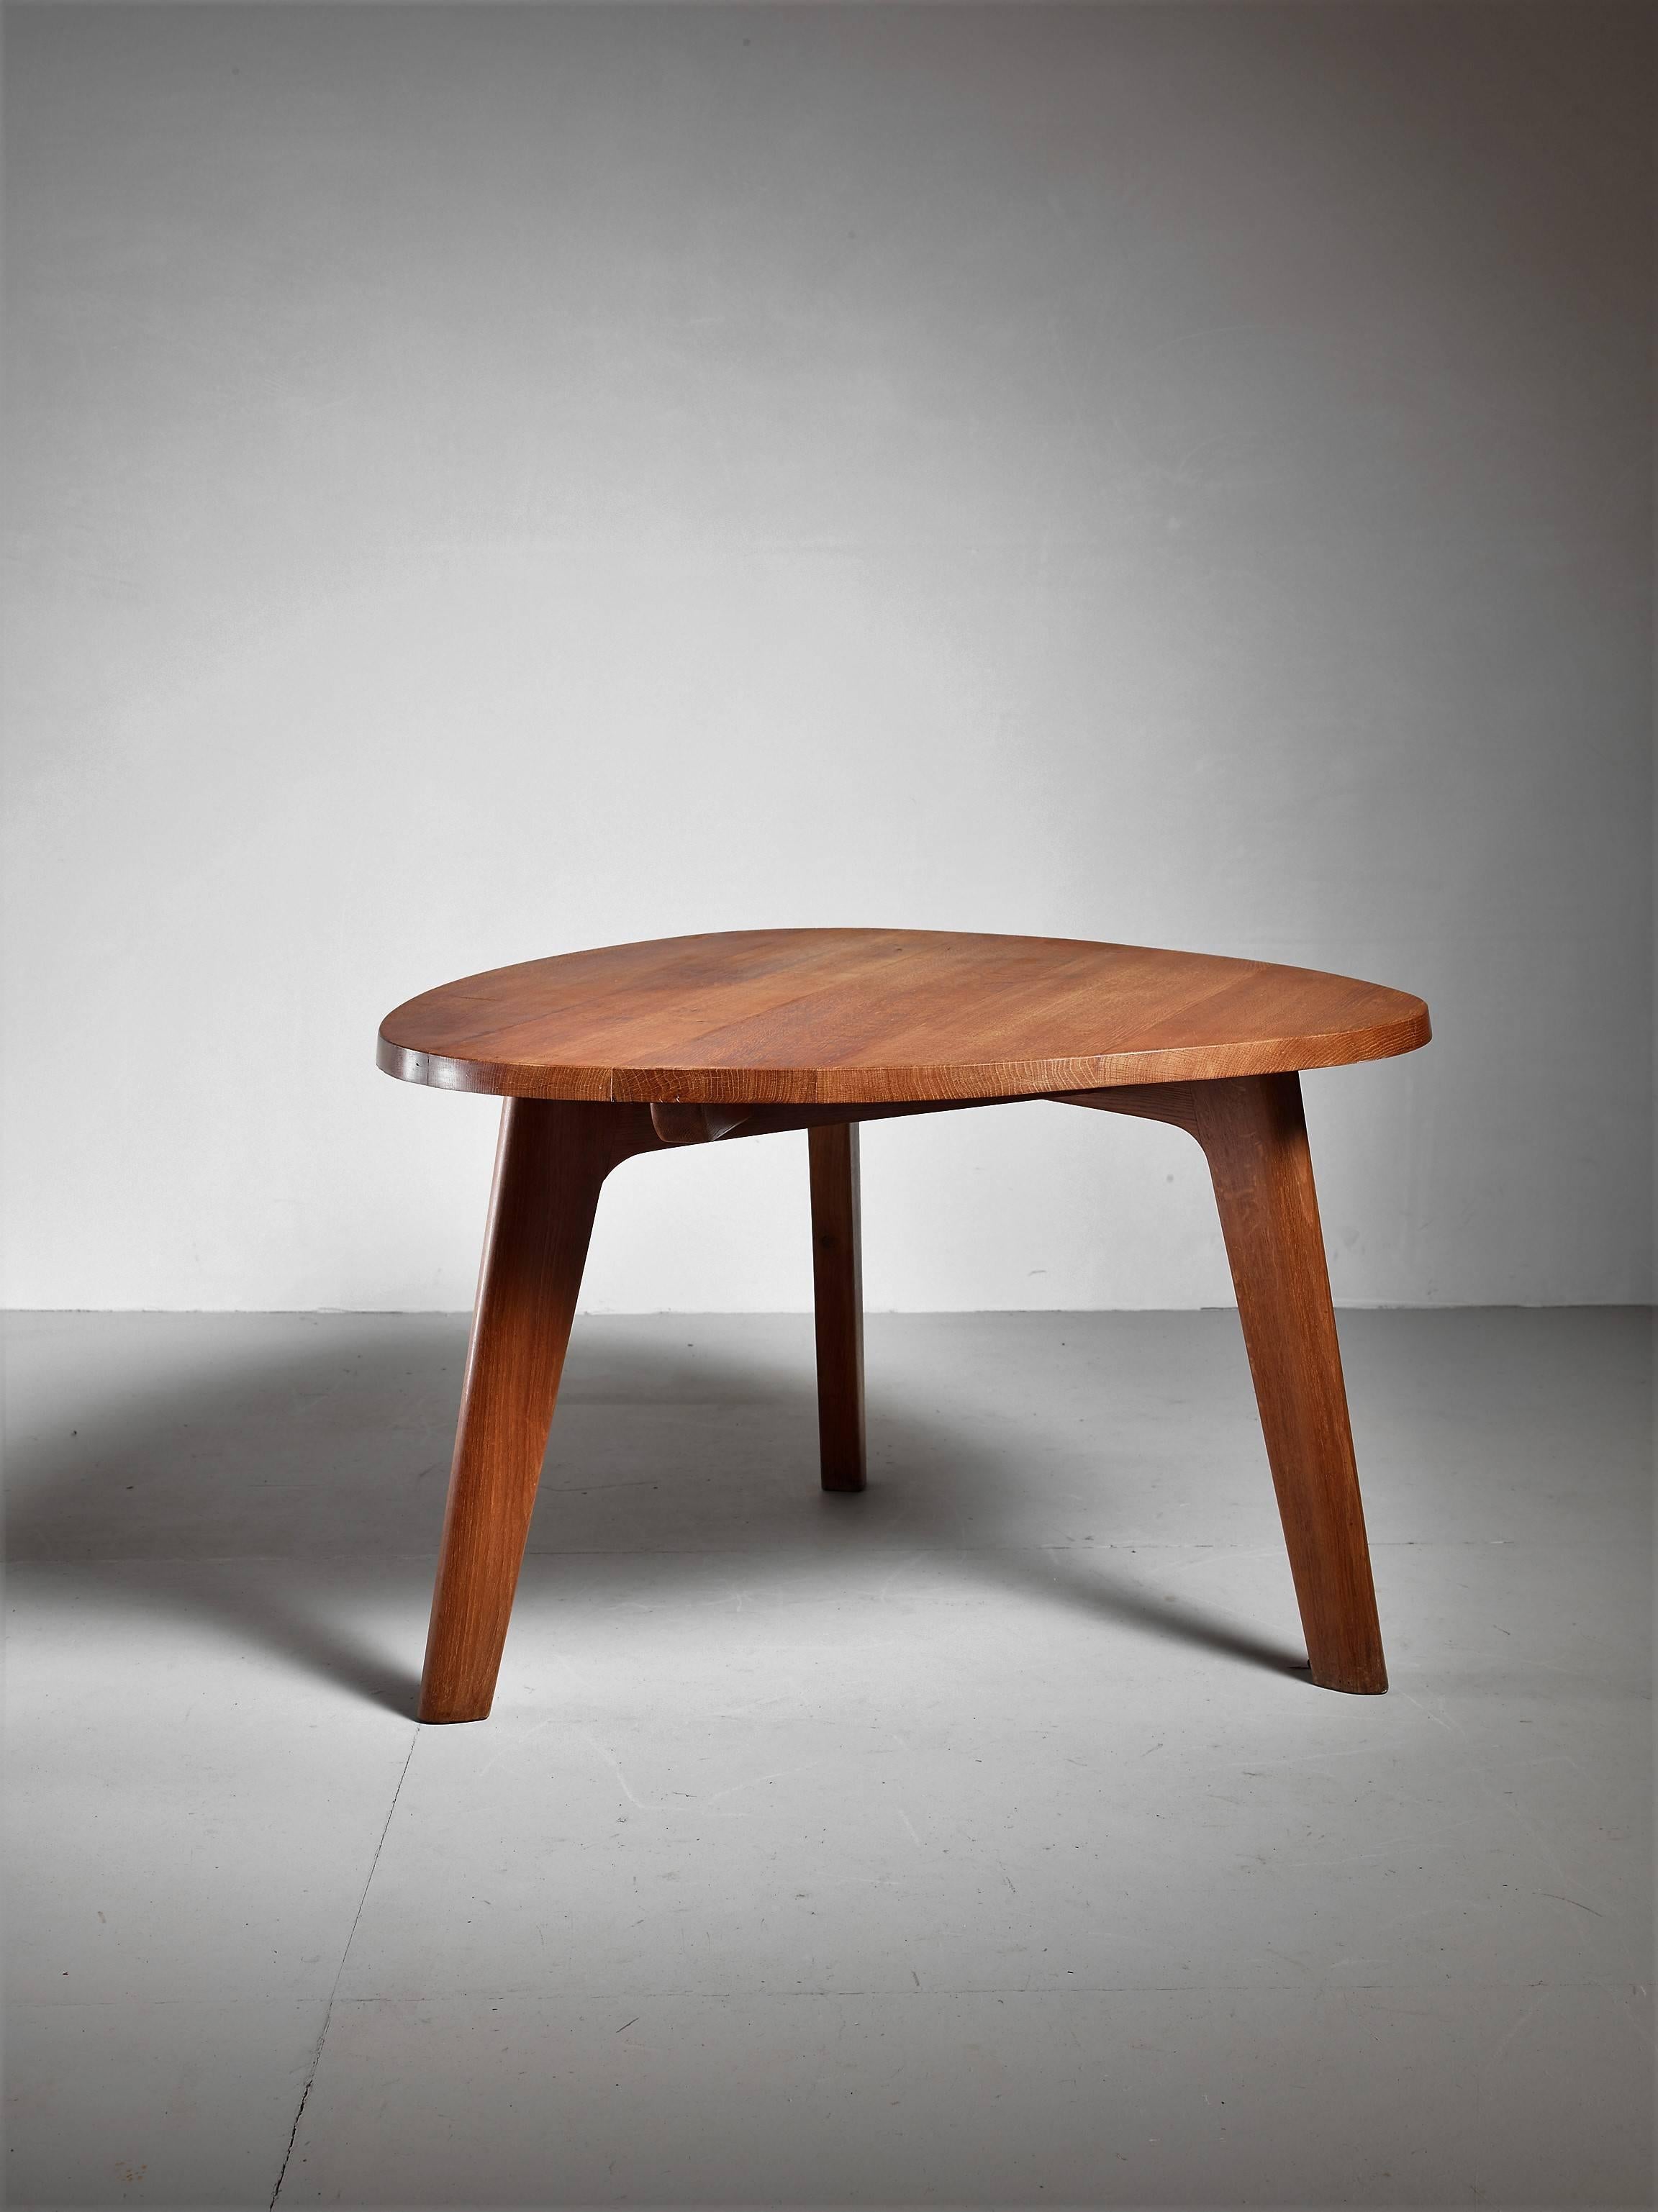 A triangle-shaped oak dinner table from France in the Campagne style known from designers like Pierre Chapo. The slim and light appearance combined with the more heavy wood give this table its special character.
* This piece is offered to you by